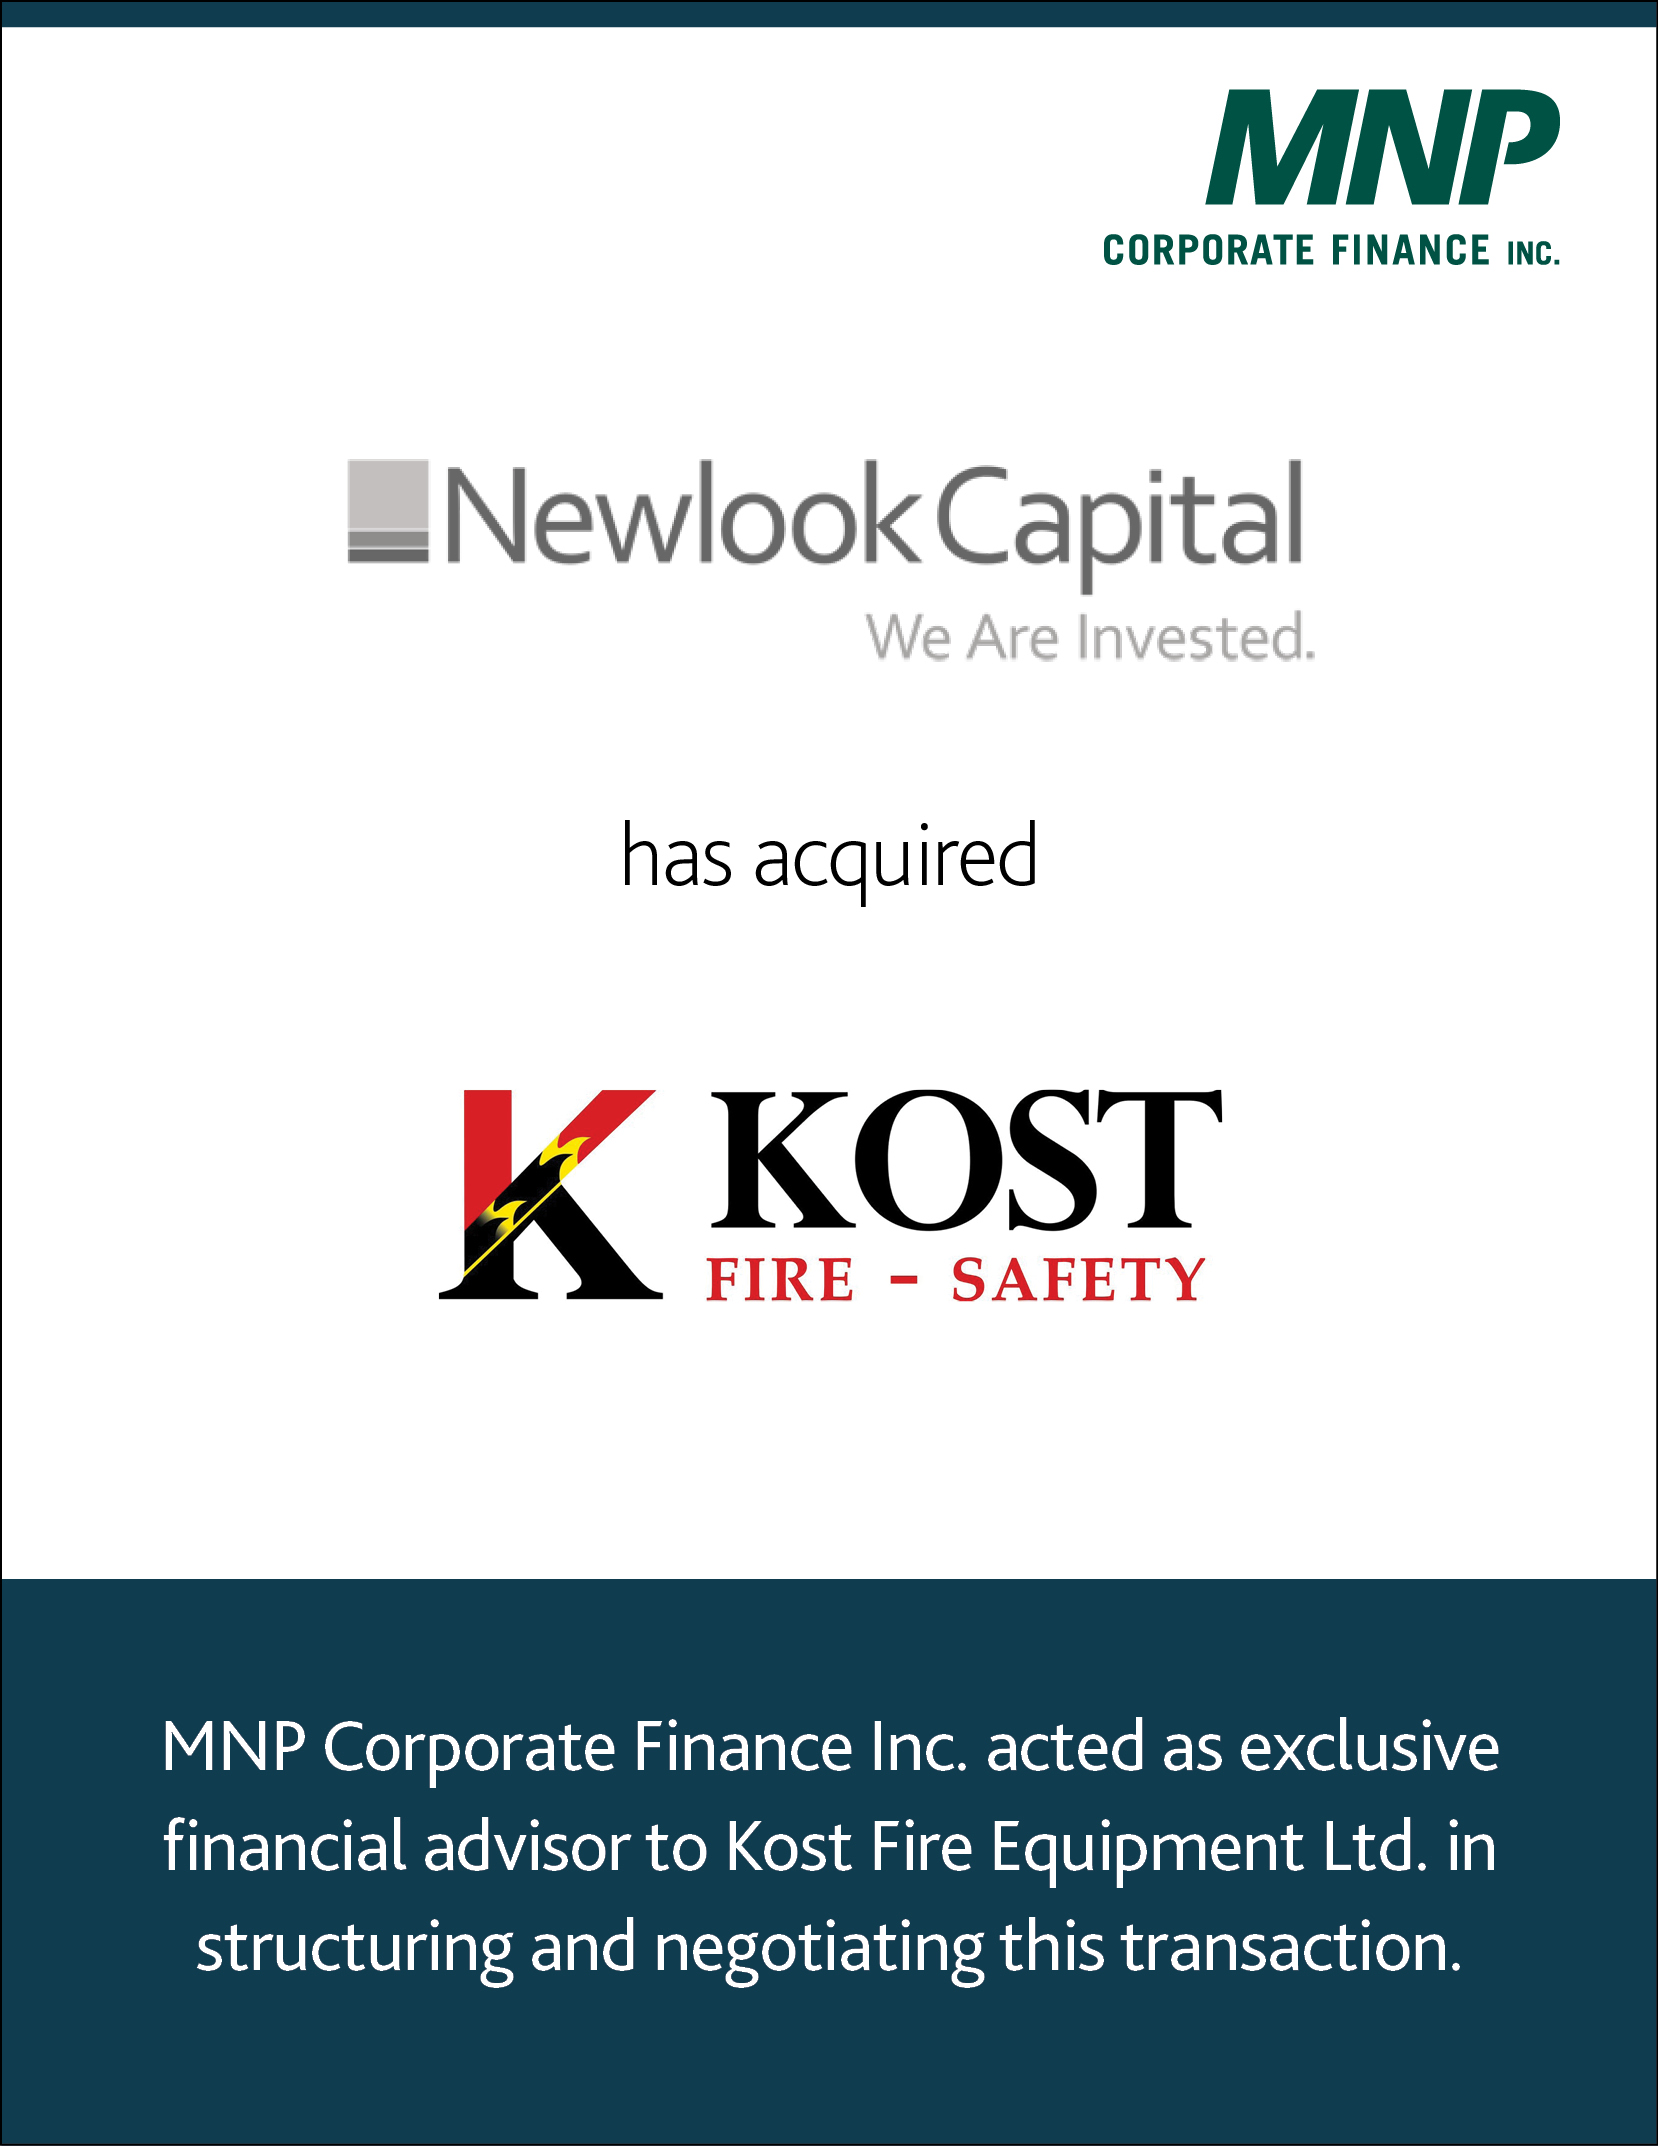 Newlook Capital and KOST logos.